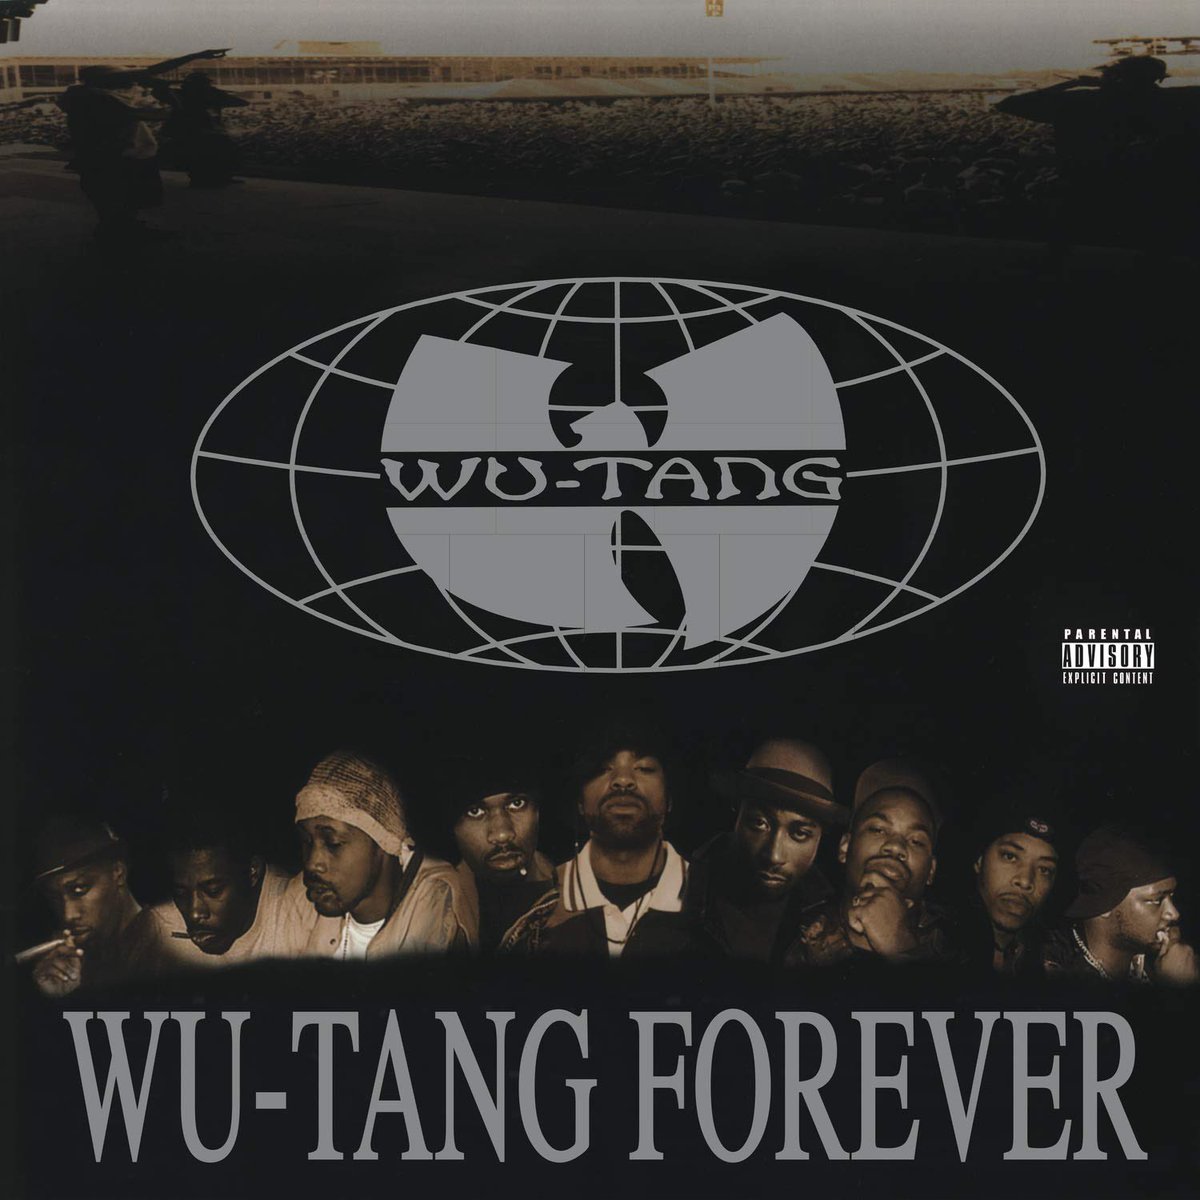 1997: Wu-Tang Forever - Wu-Tang ClanAlthough a slight departure from 36 Chambers, Wu-Tang Forever is still a masterful hip hop album that features some of the greatest rappers oat.Fave tracks: triumph, as high as wutang gets, reunitedHm: In my lifetime, supa dupa fly